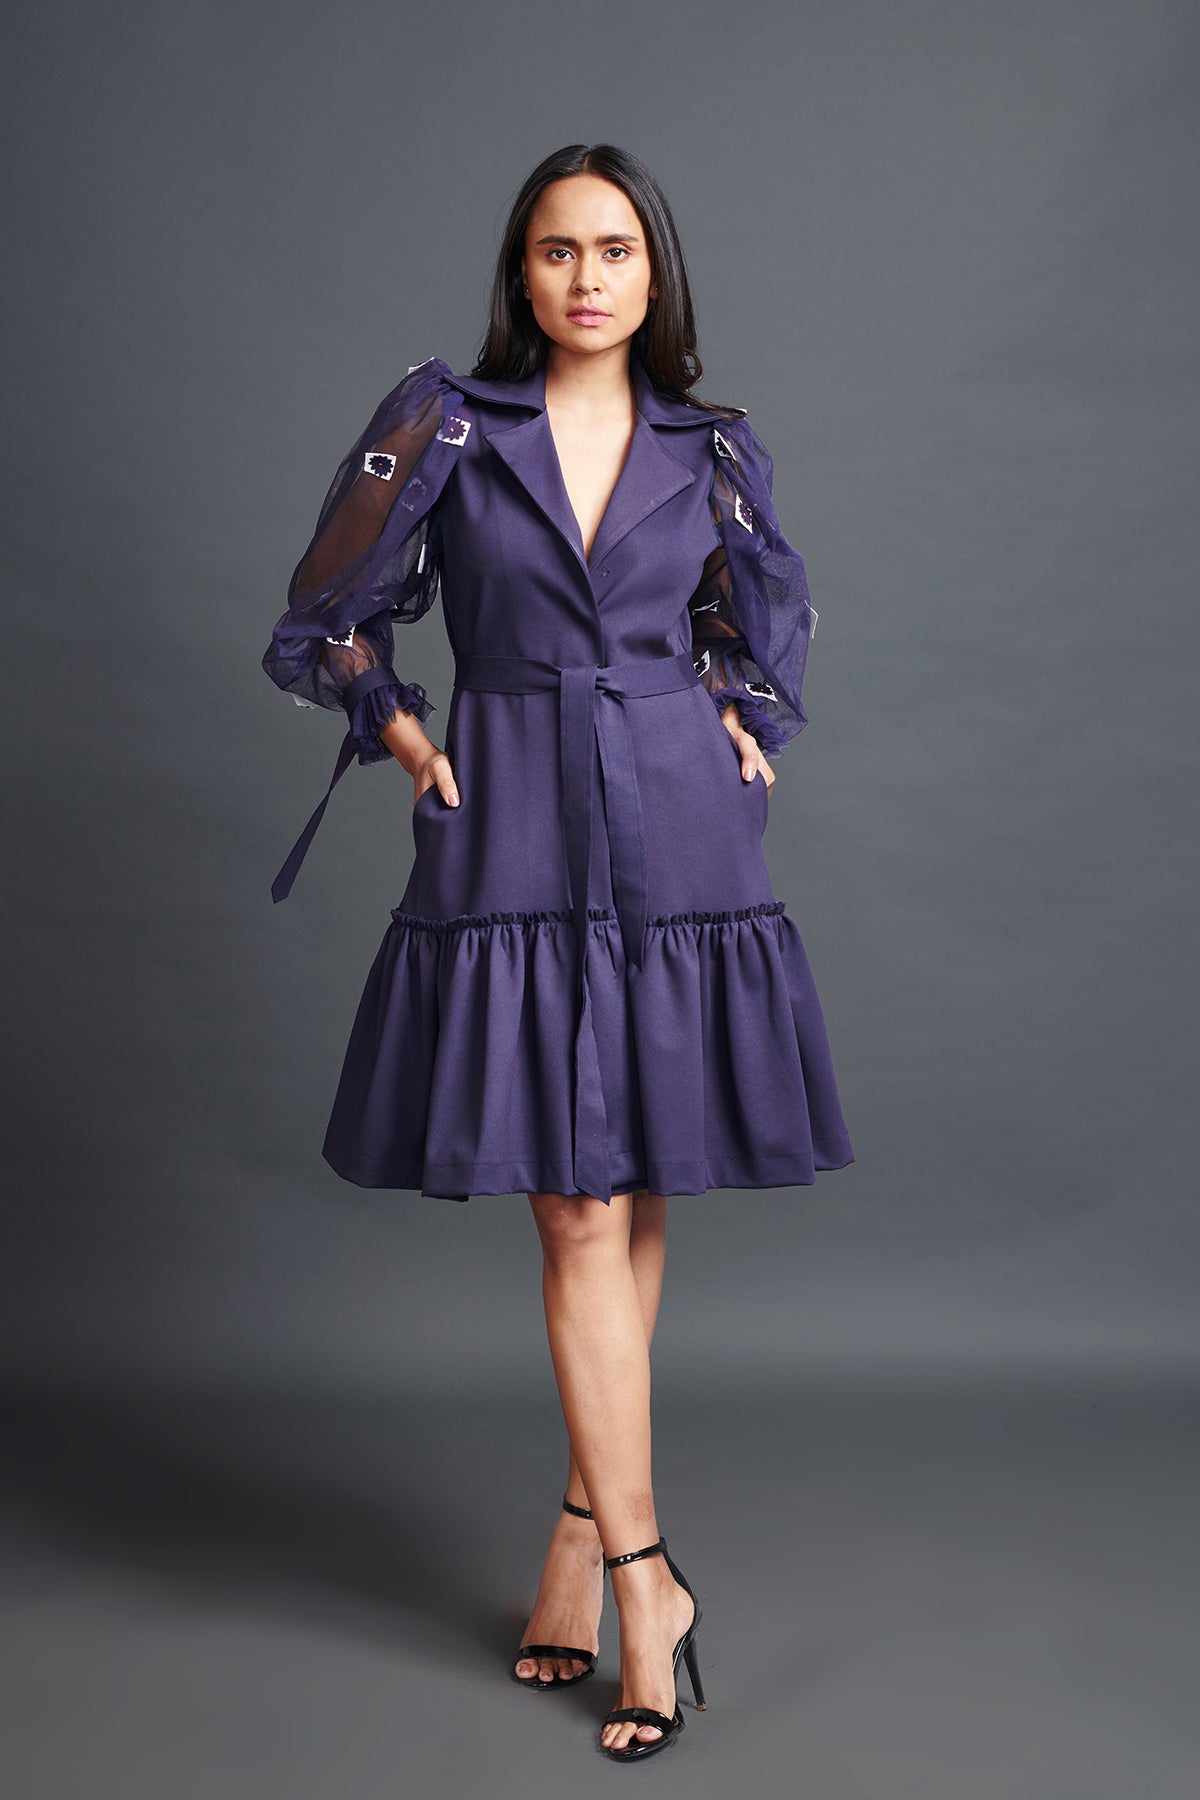 Image of PURPLE JACKET DRESS WITH CUTWORK ON PUFFED SLEEVES. From savoirfashions.com